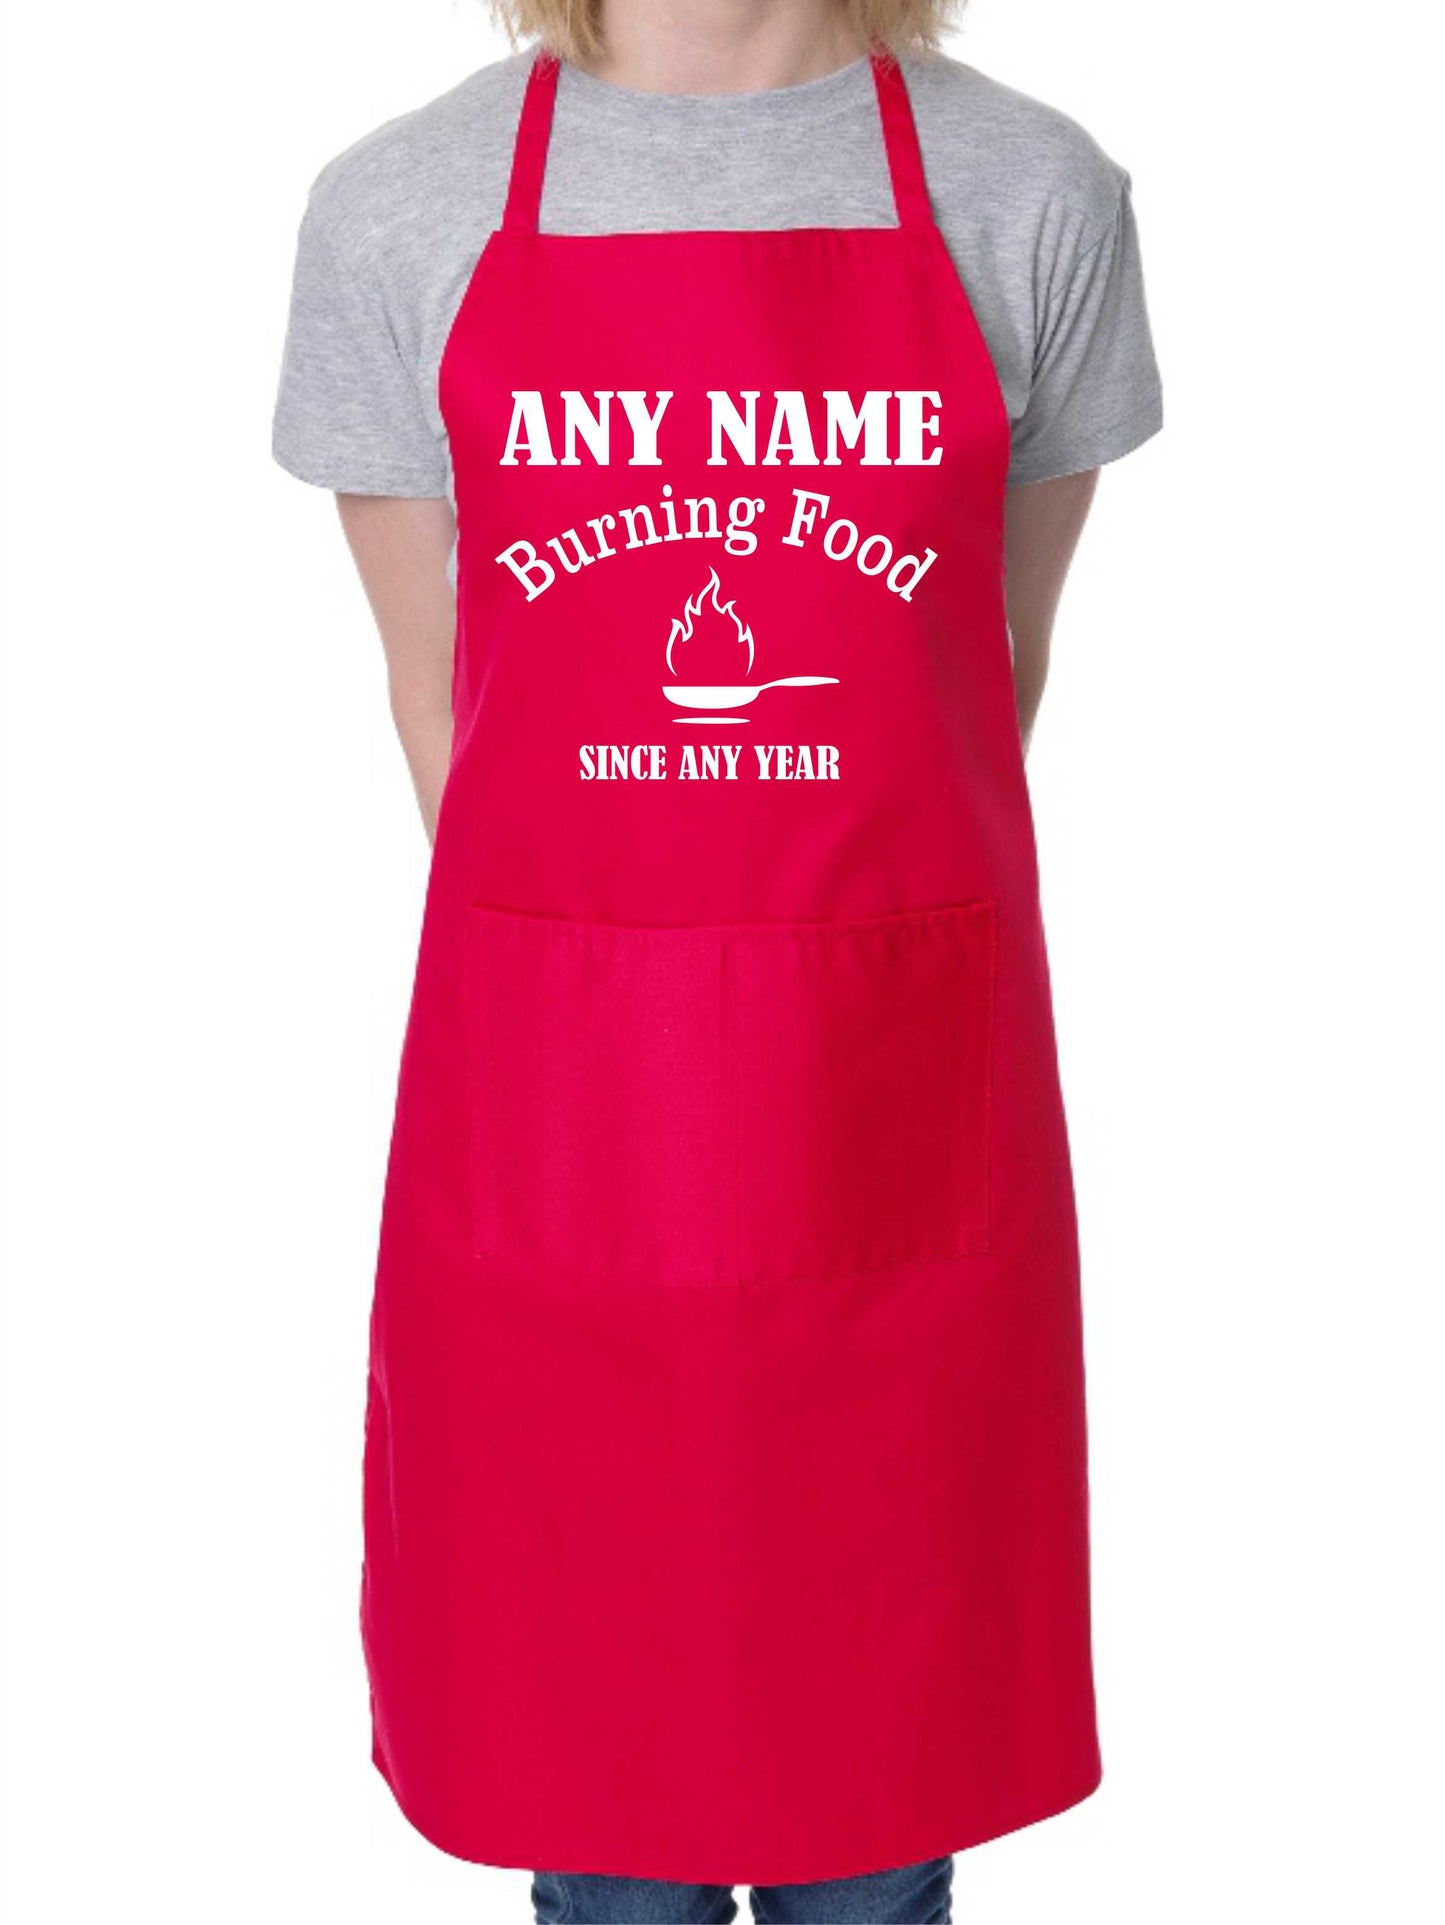 Adult Personalised Apron Burning Food Since Your Name & Year Here BBQ Baking